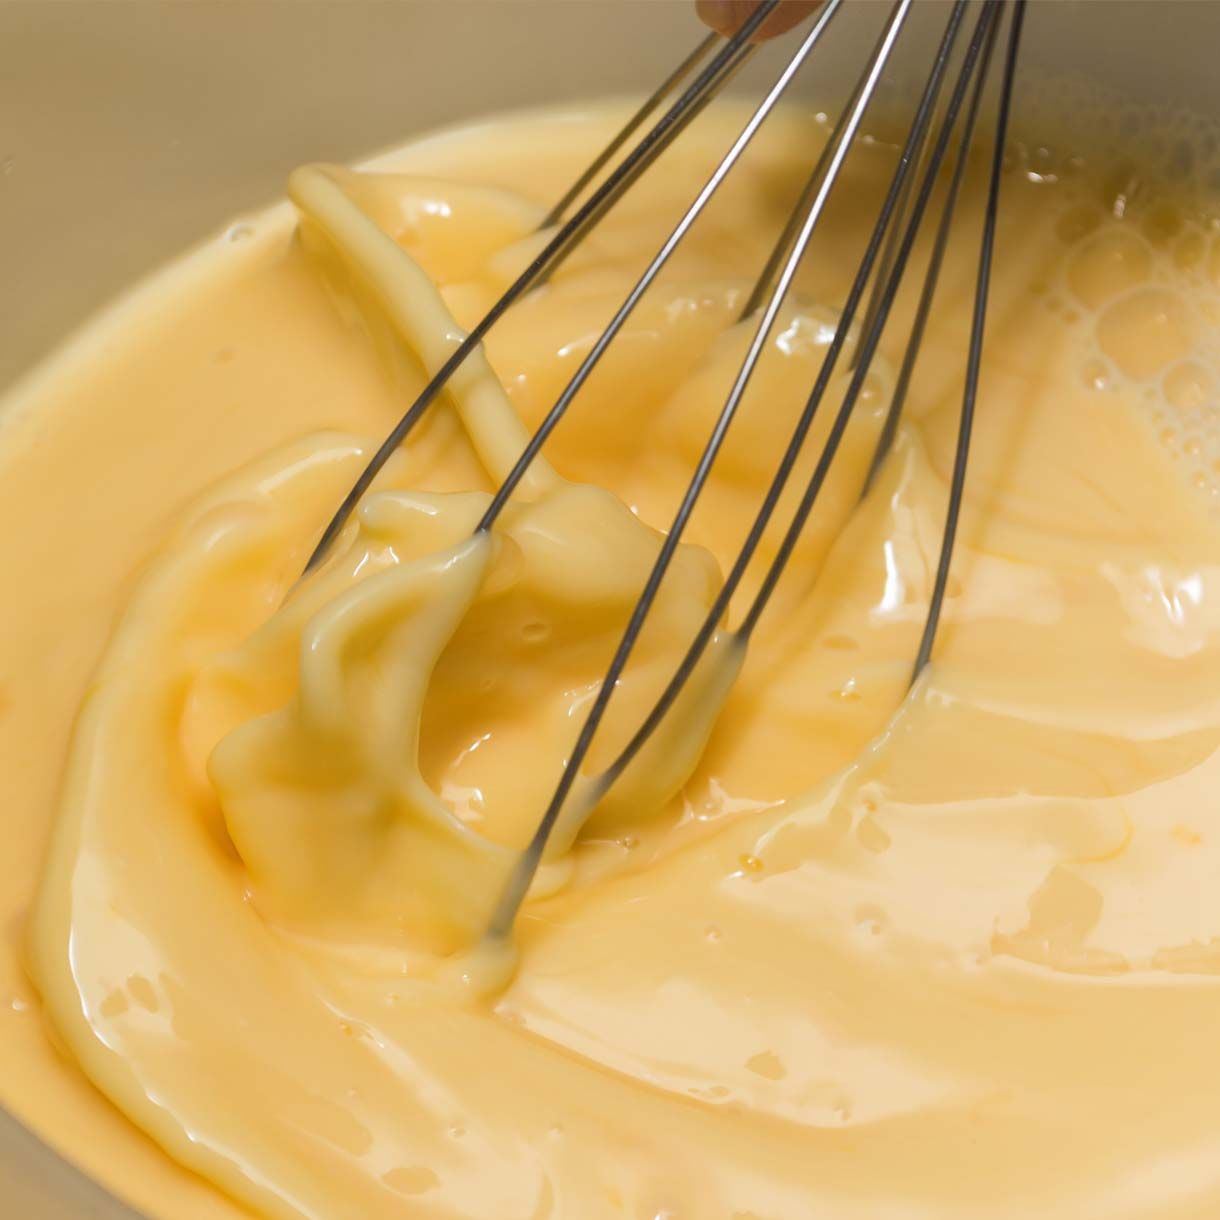 Liquid Egg being whisked